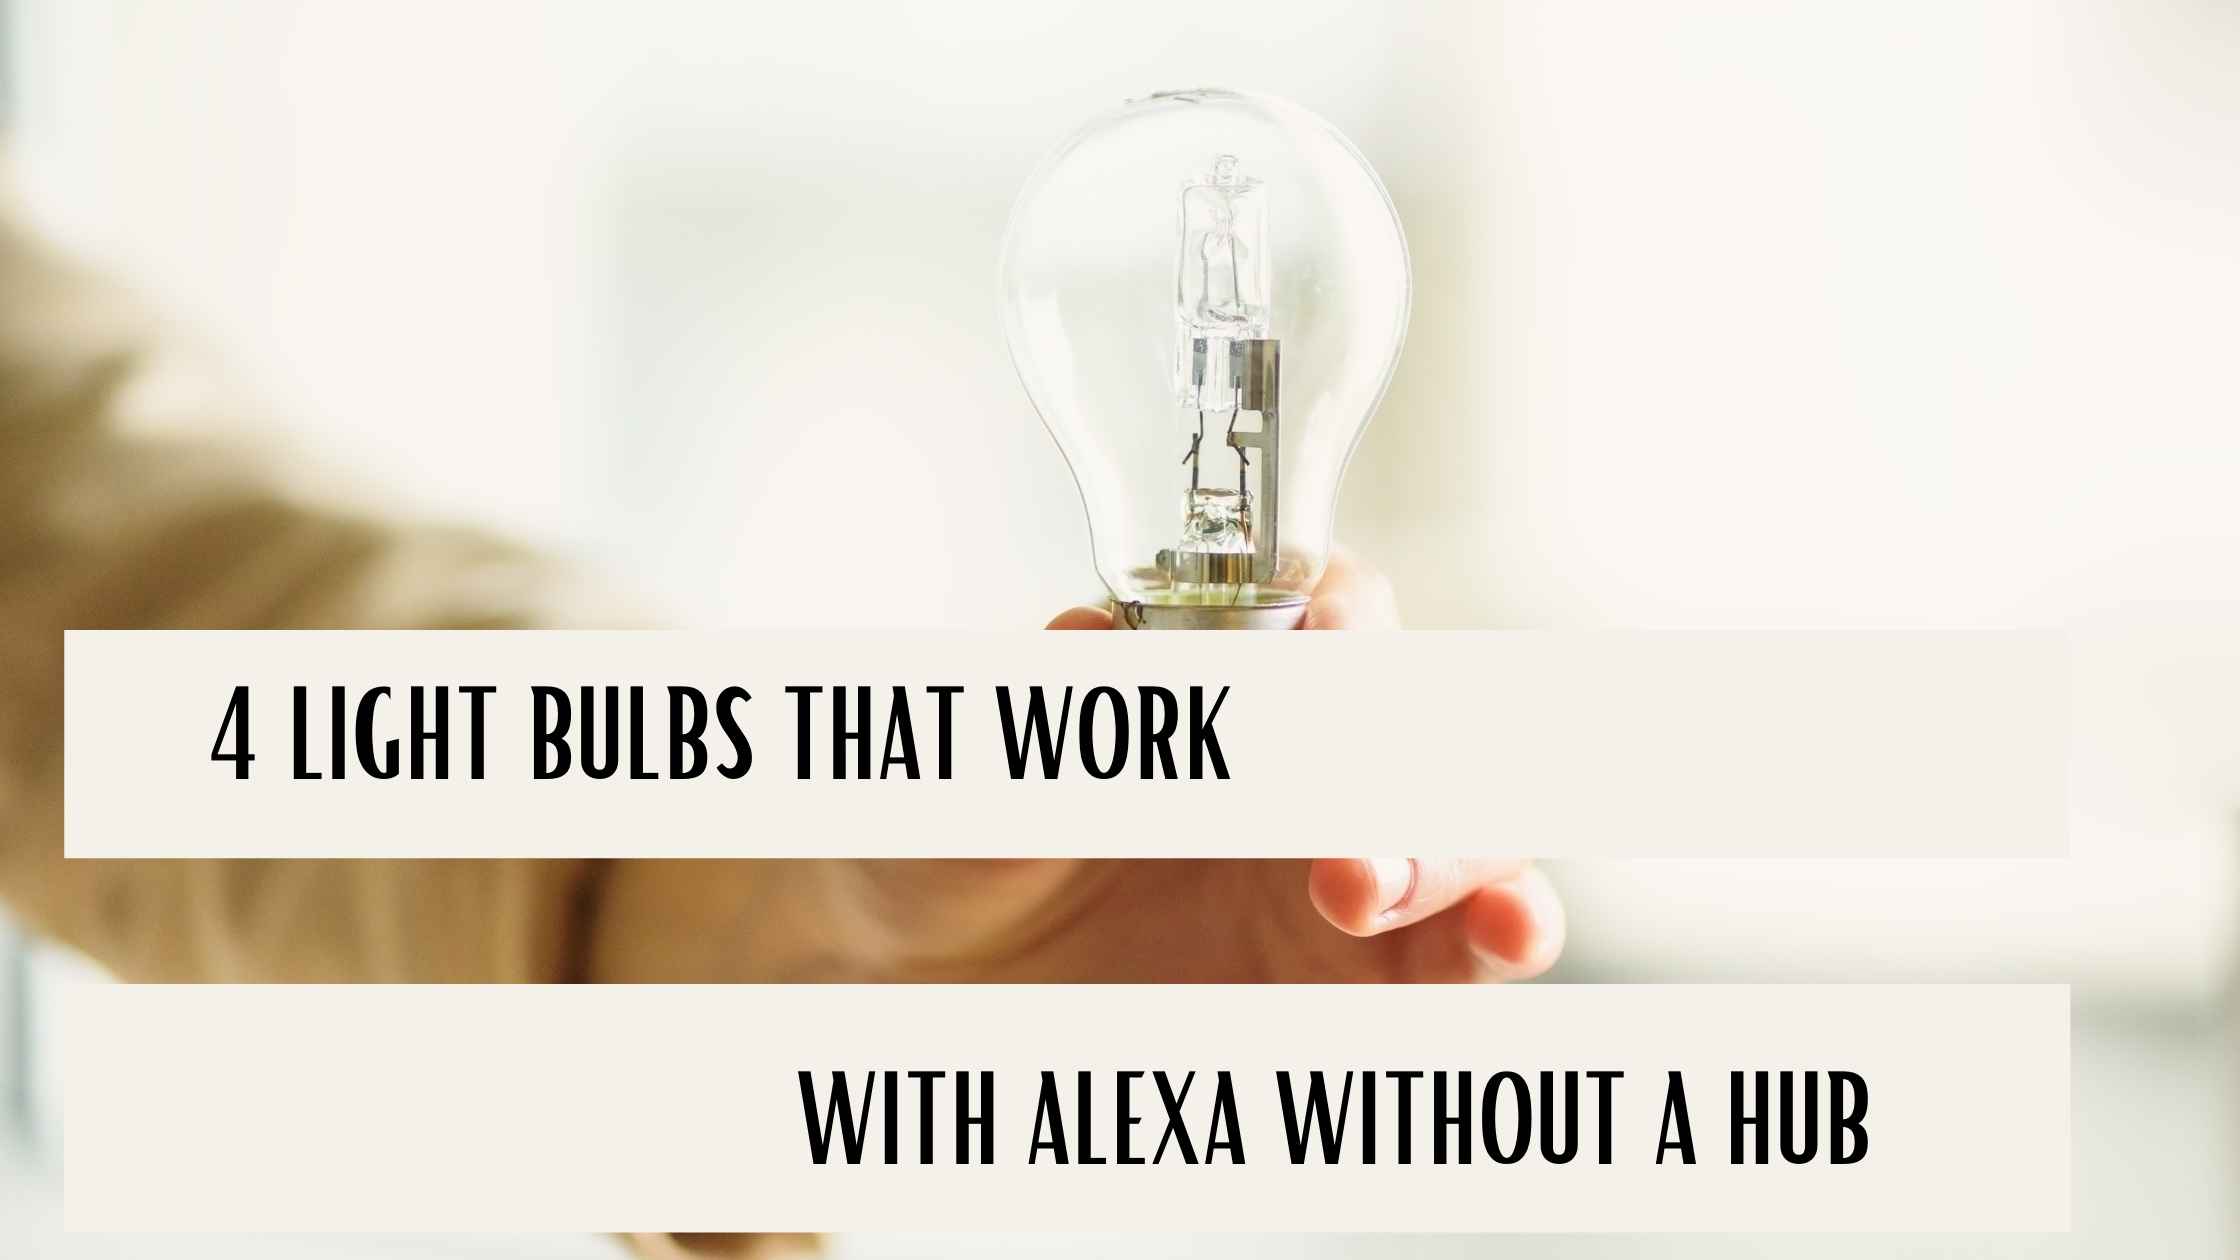 4 LIGHT BULBS THAT WORK WITH ALEXA WITHOUT A HUB